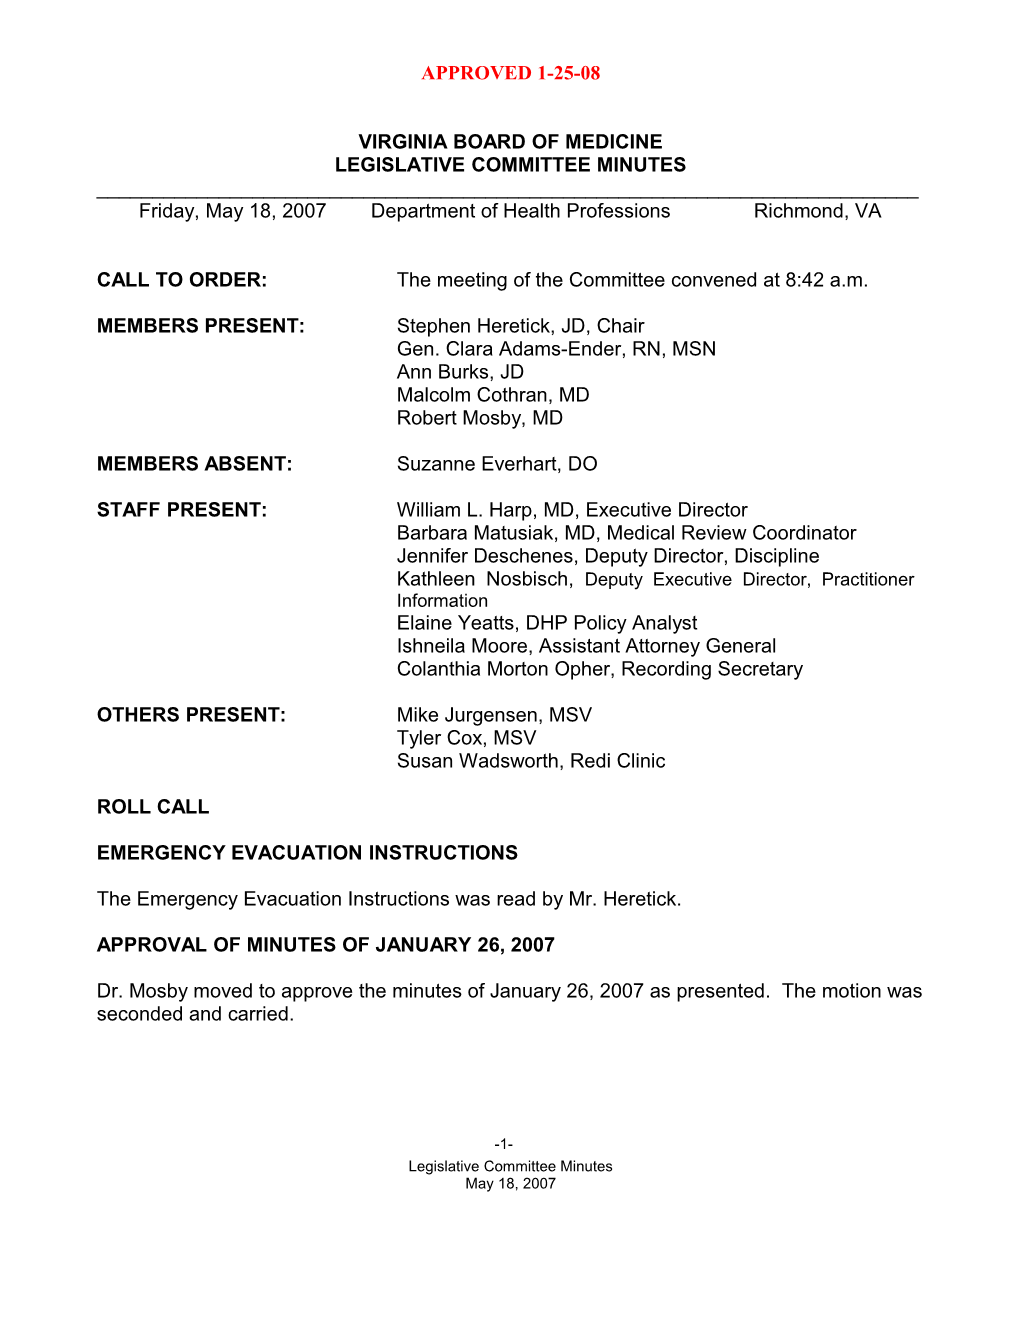 Medicine - Approved Minutes for May 18, 2007 Legislative Committee Meeting